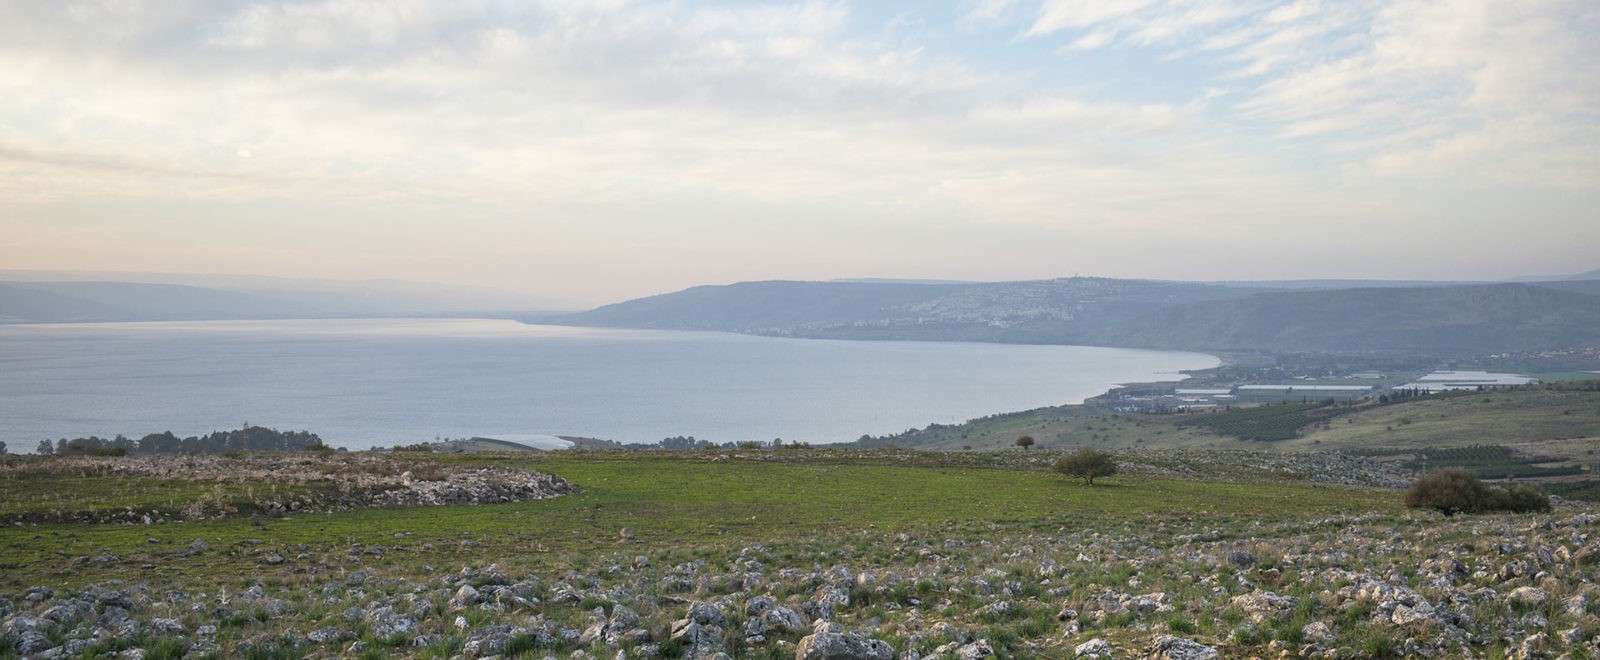 6 Best Churches in the Galilee